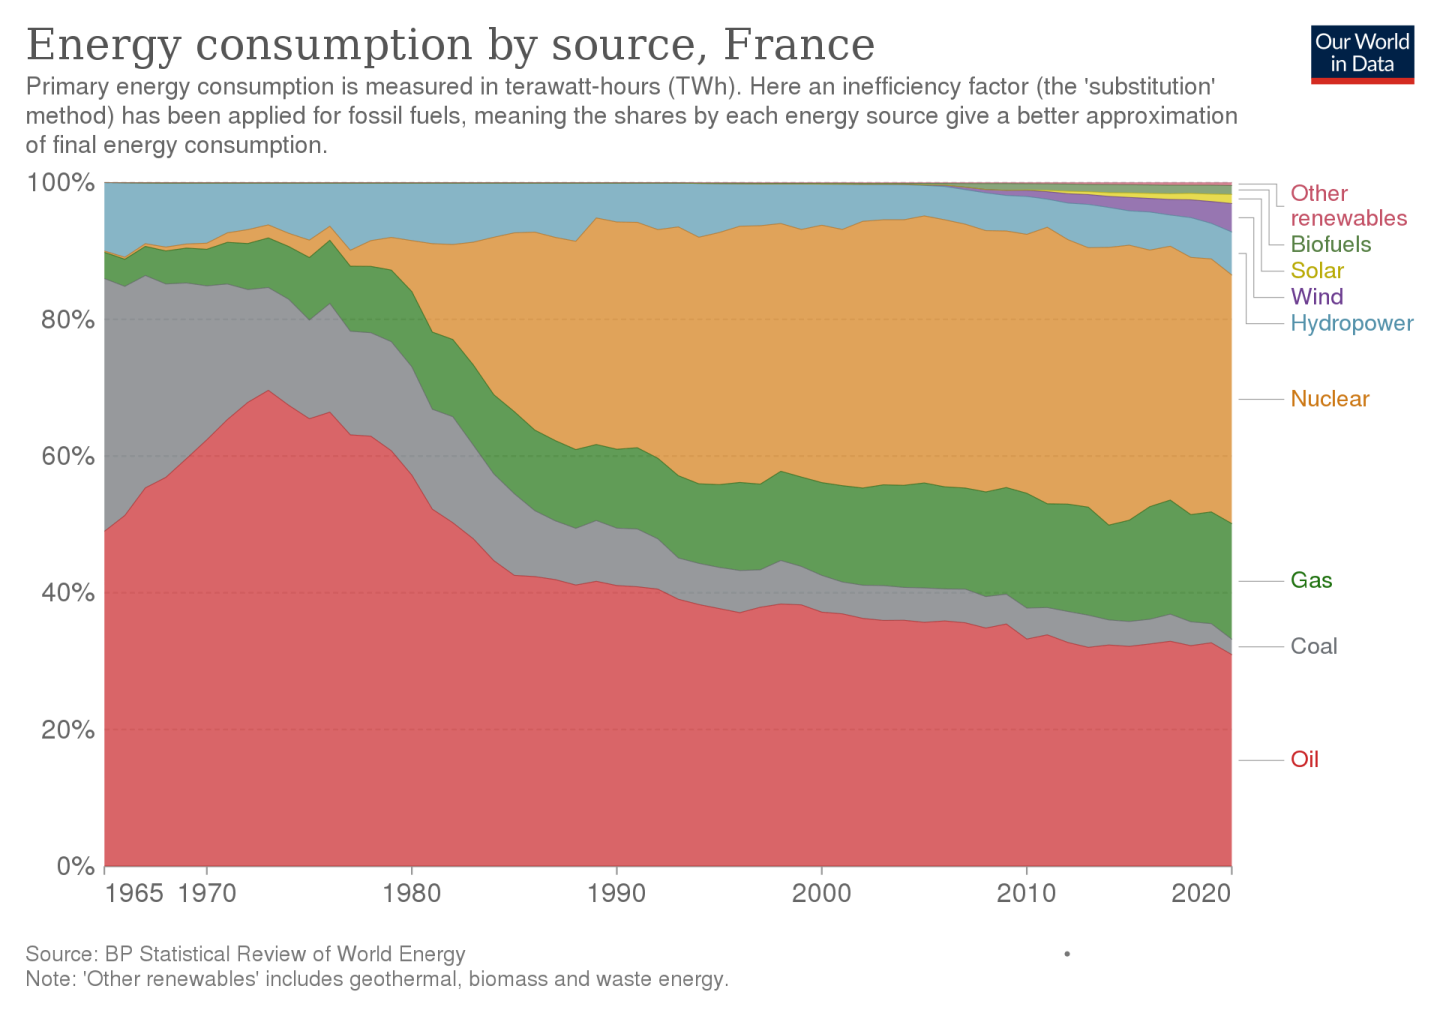 Graph showing the Energy Mixture in France from 1970 to 2020